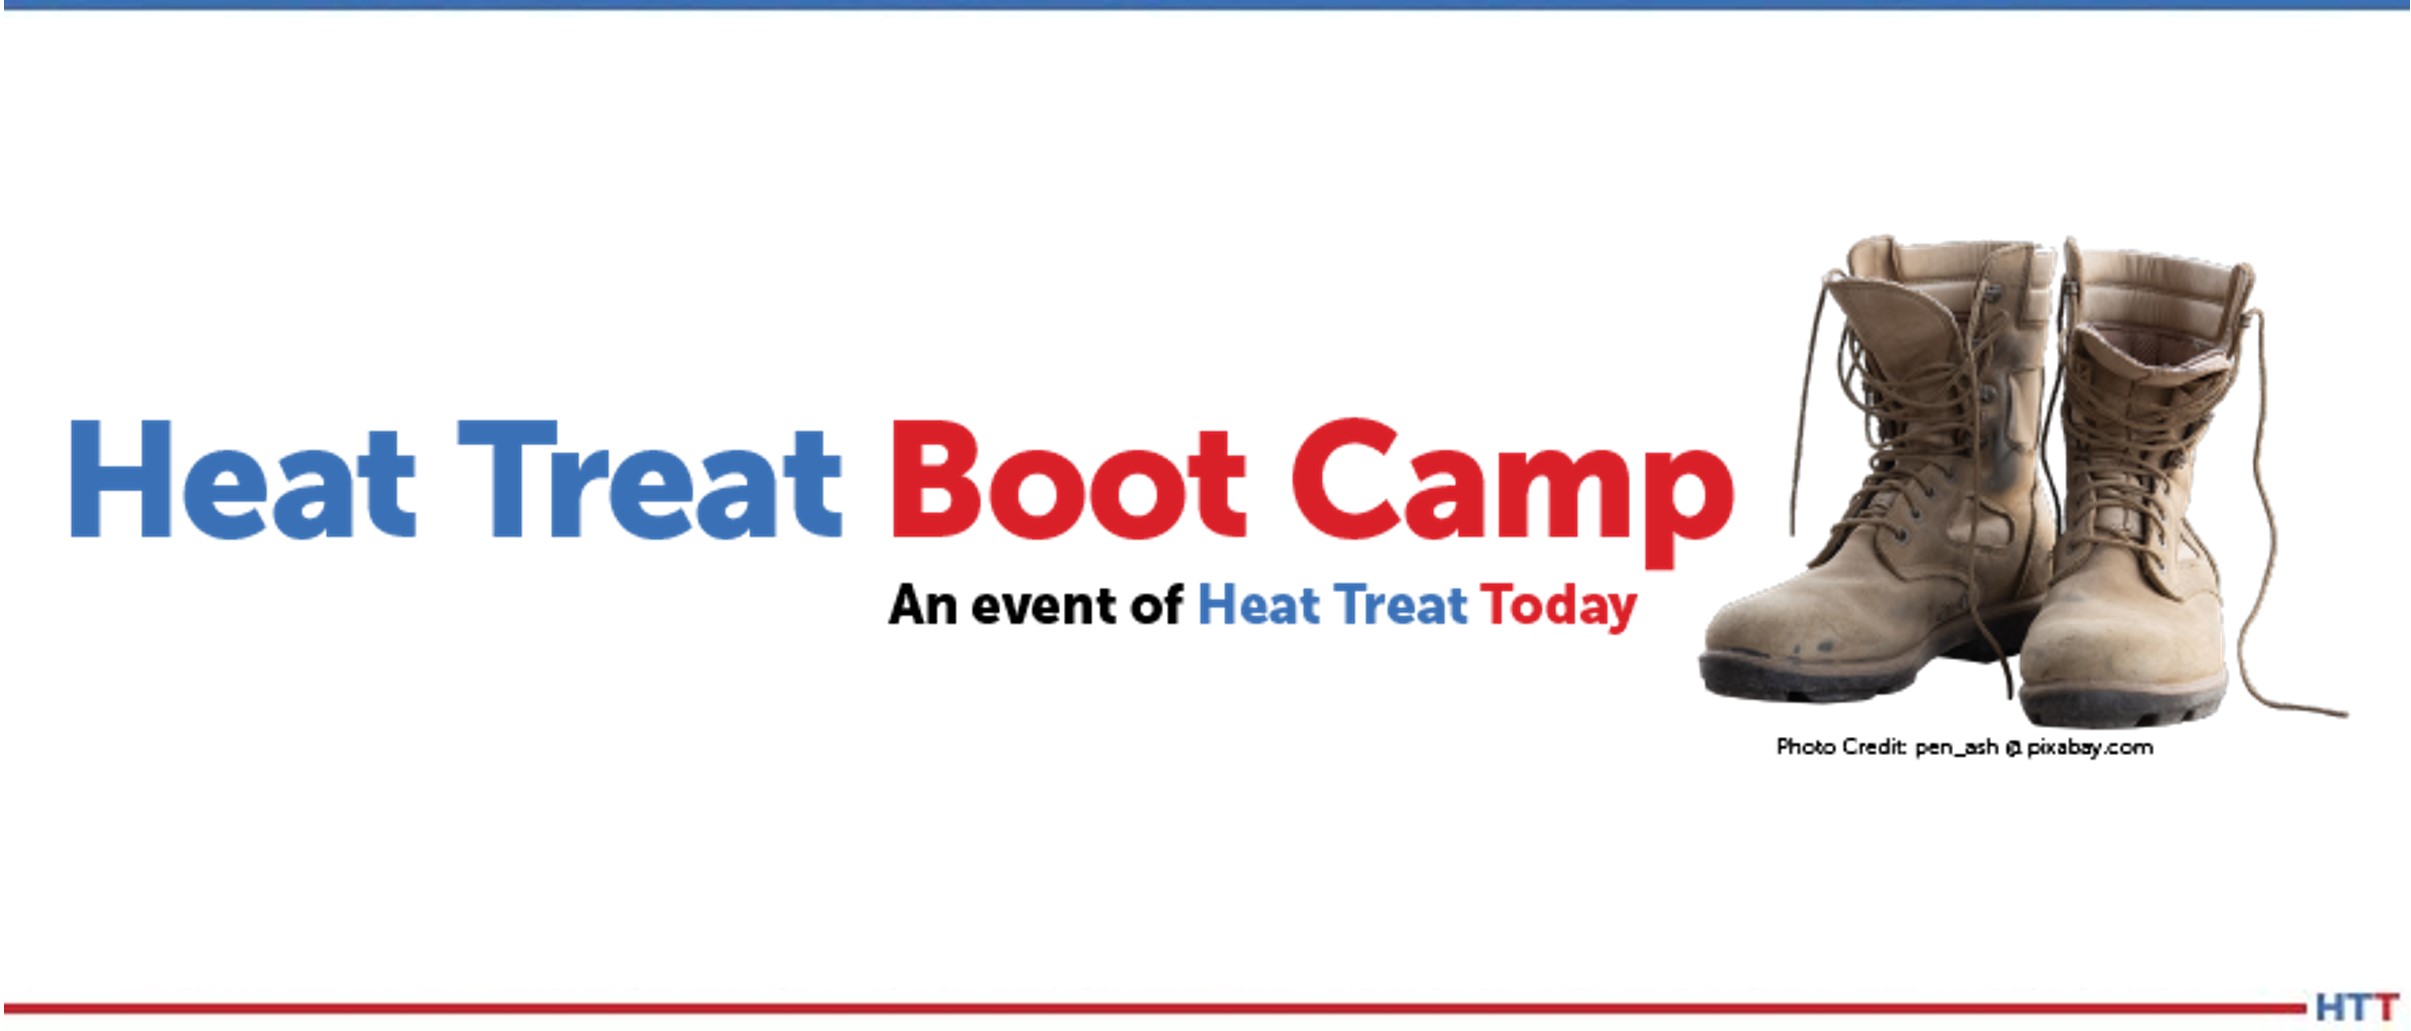 Heat Treat Boot Camp logo and boots